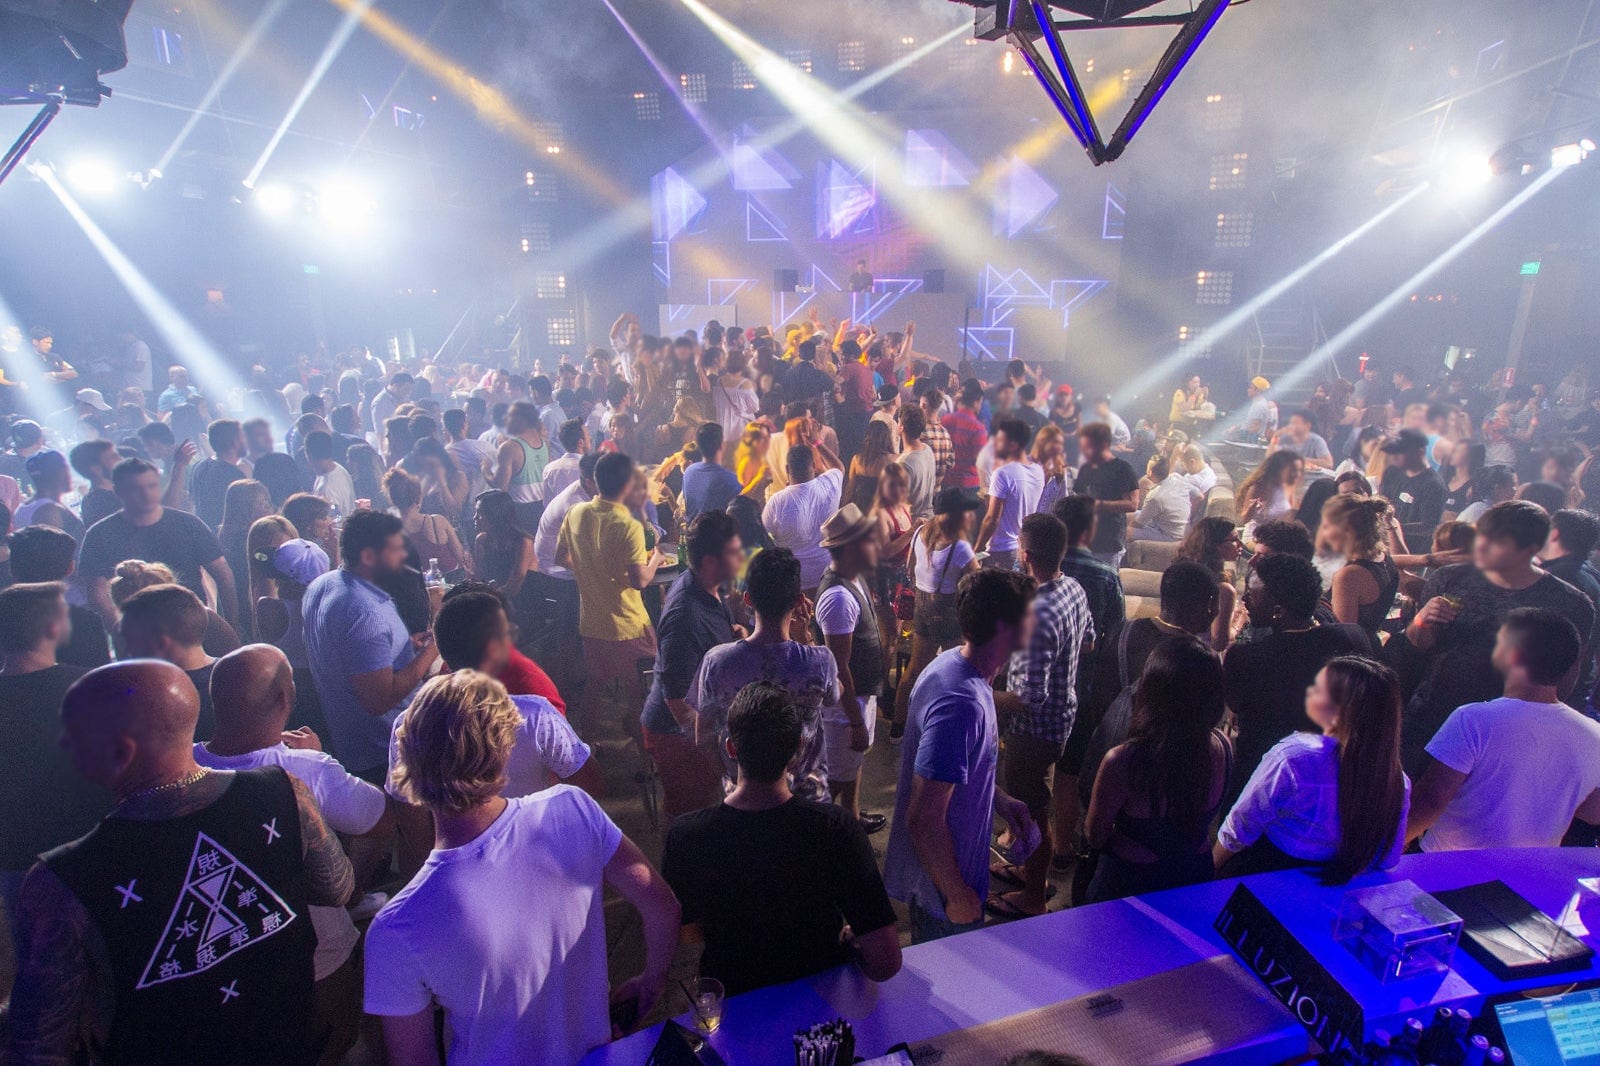 Illuzion Show and Discotheque in Phuket